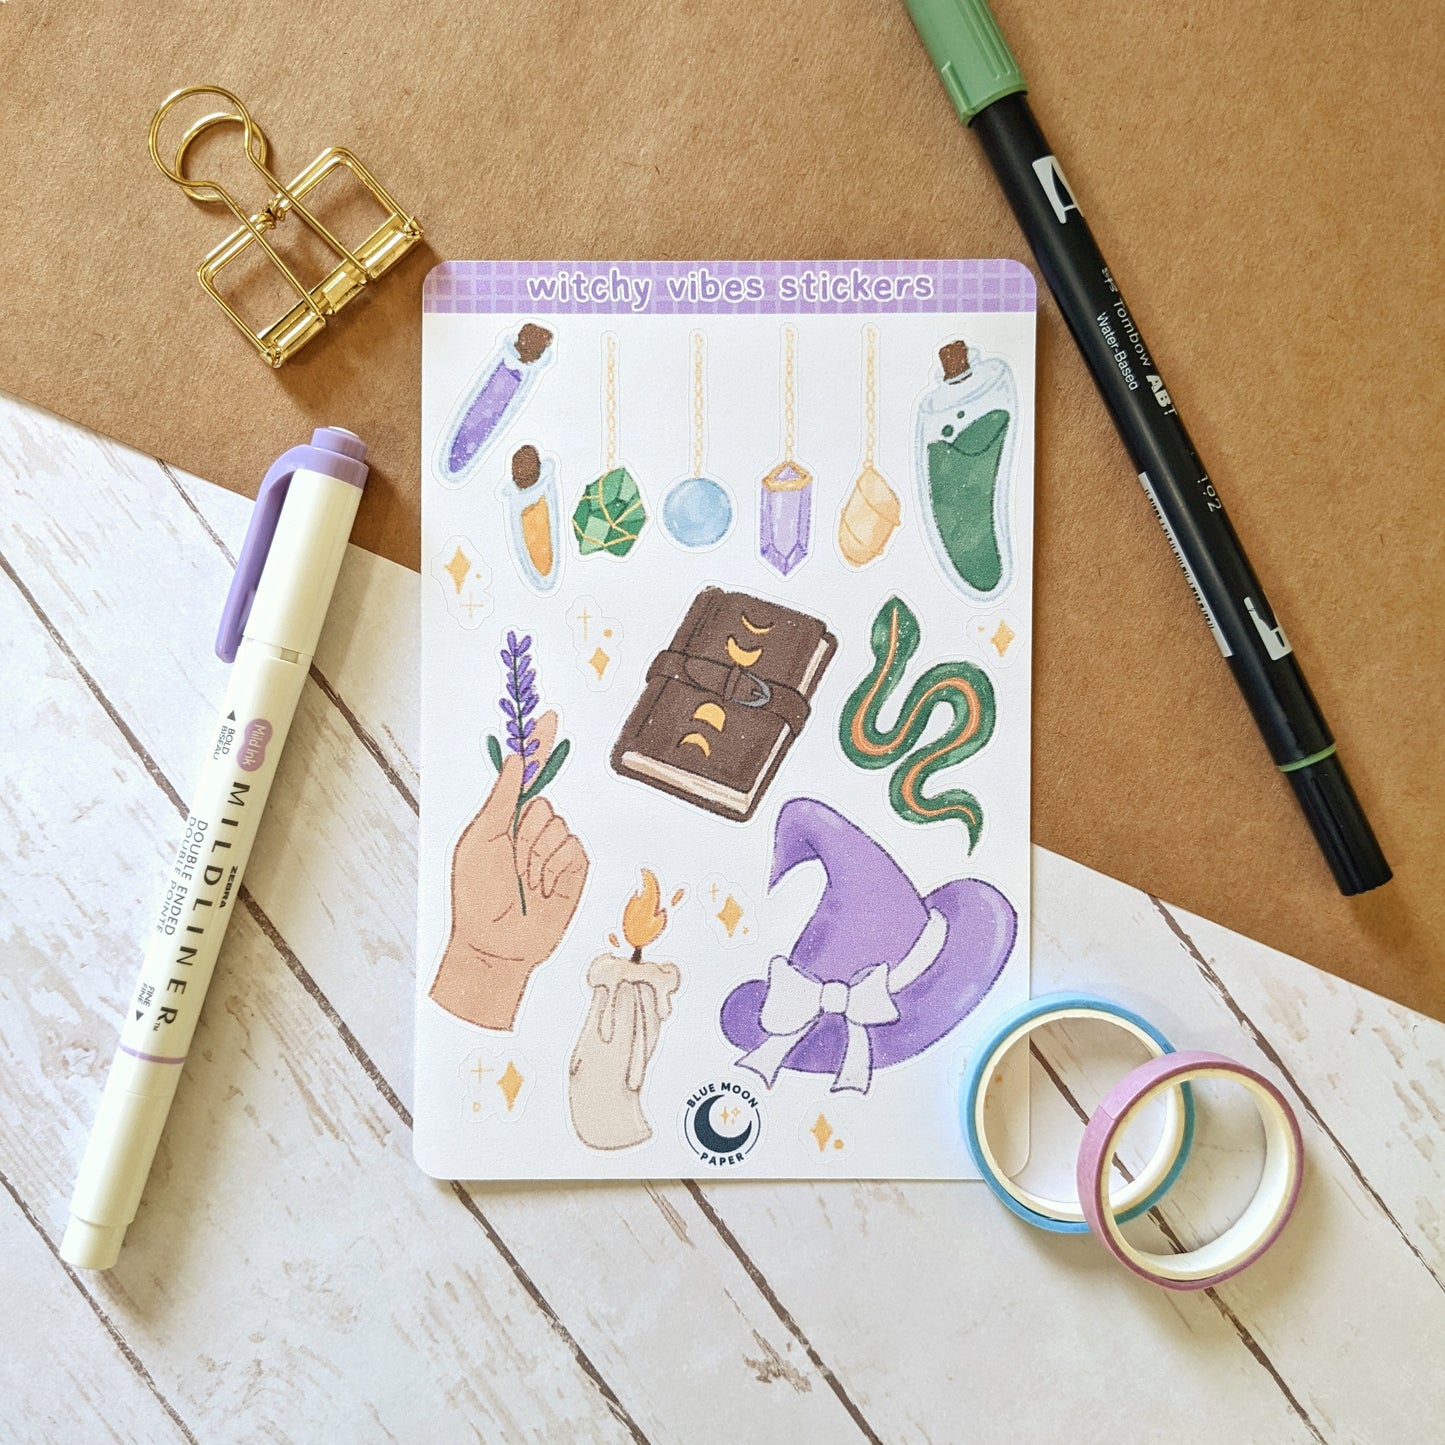 Sticker sheet with witch themed illustrations such as crystals, a snake, potions, and a witch hat.